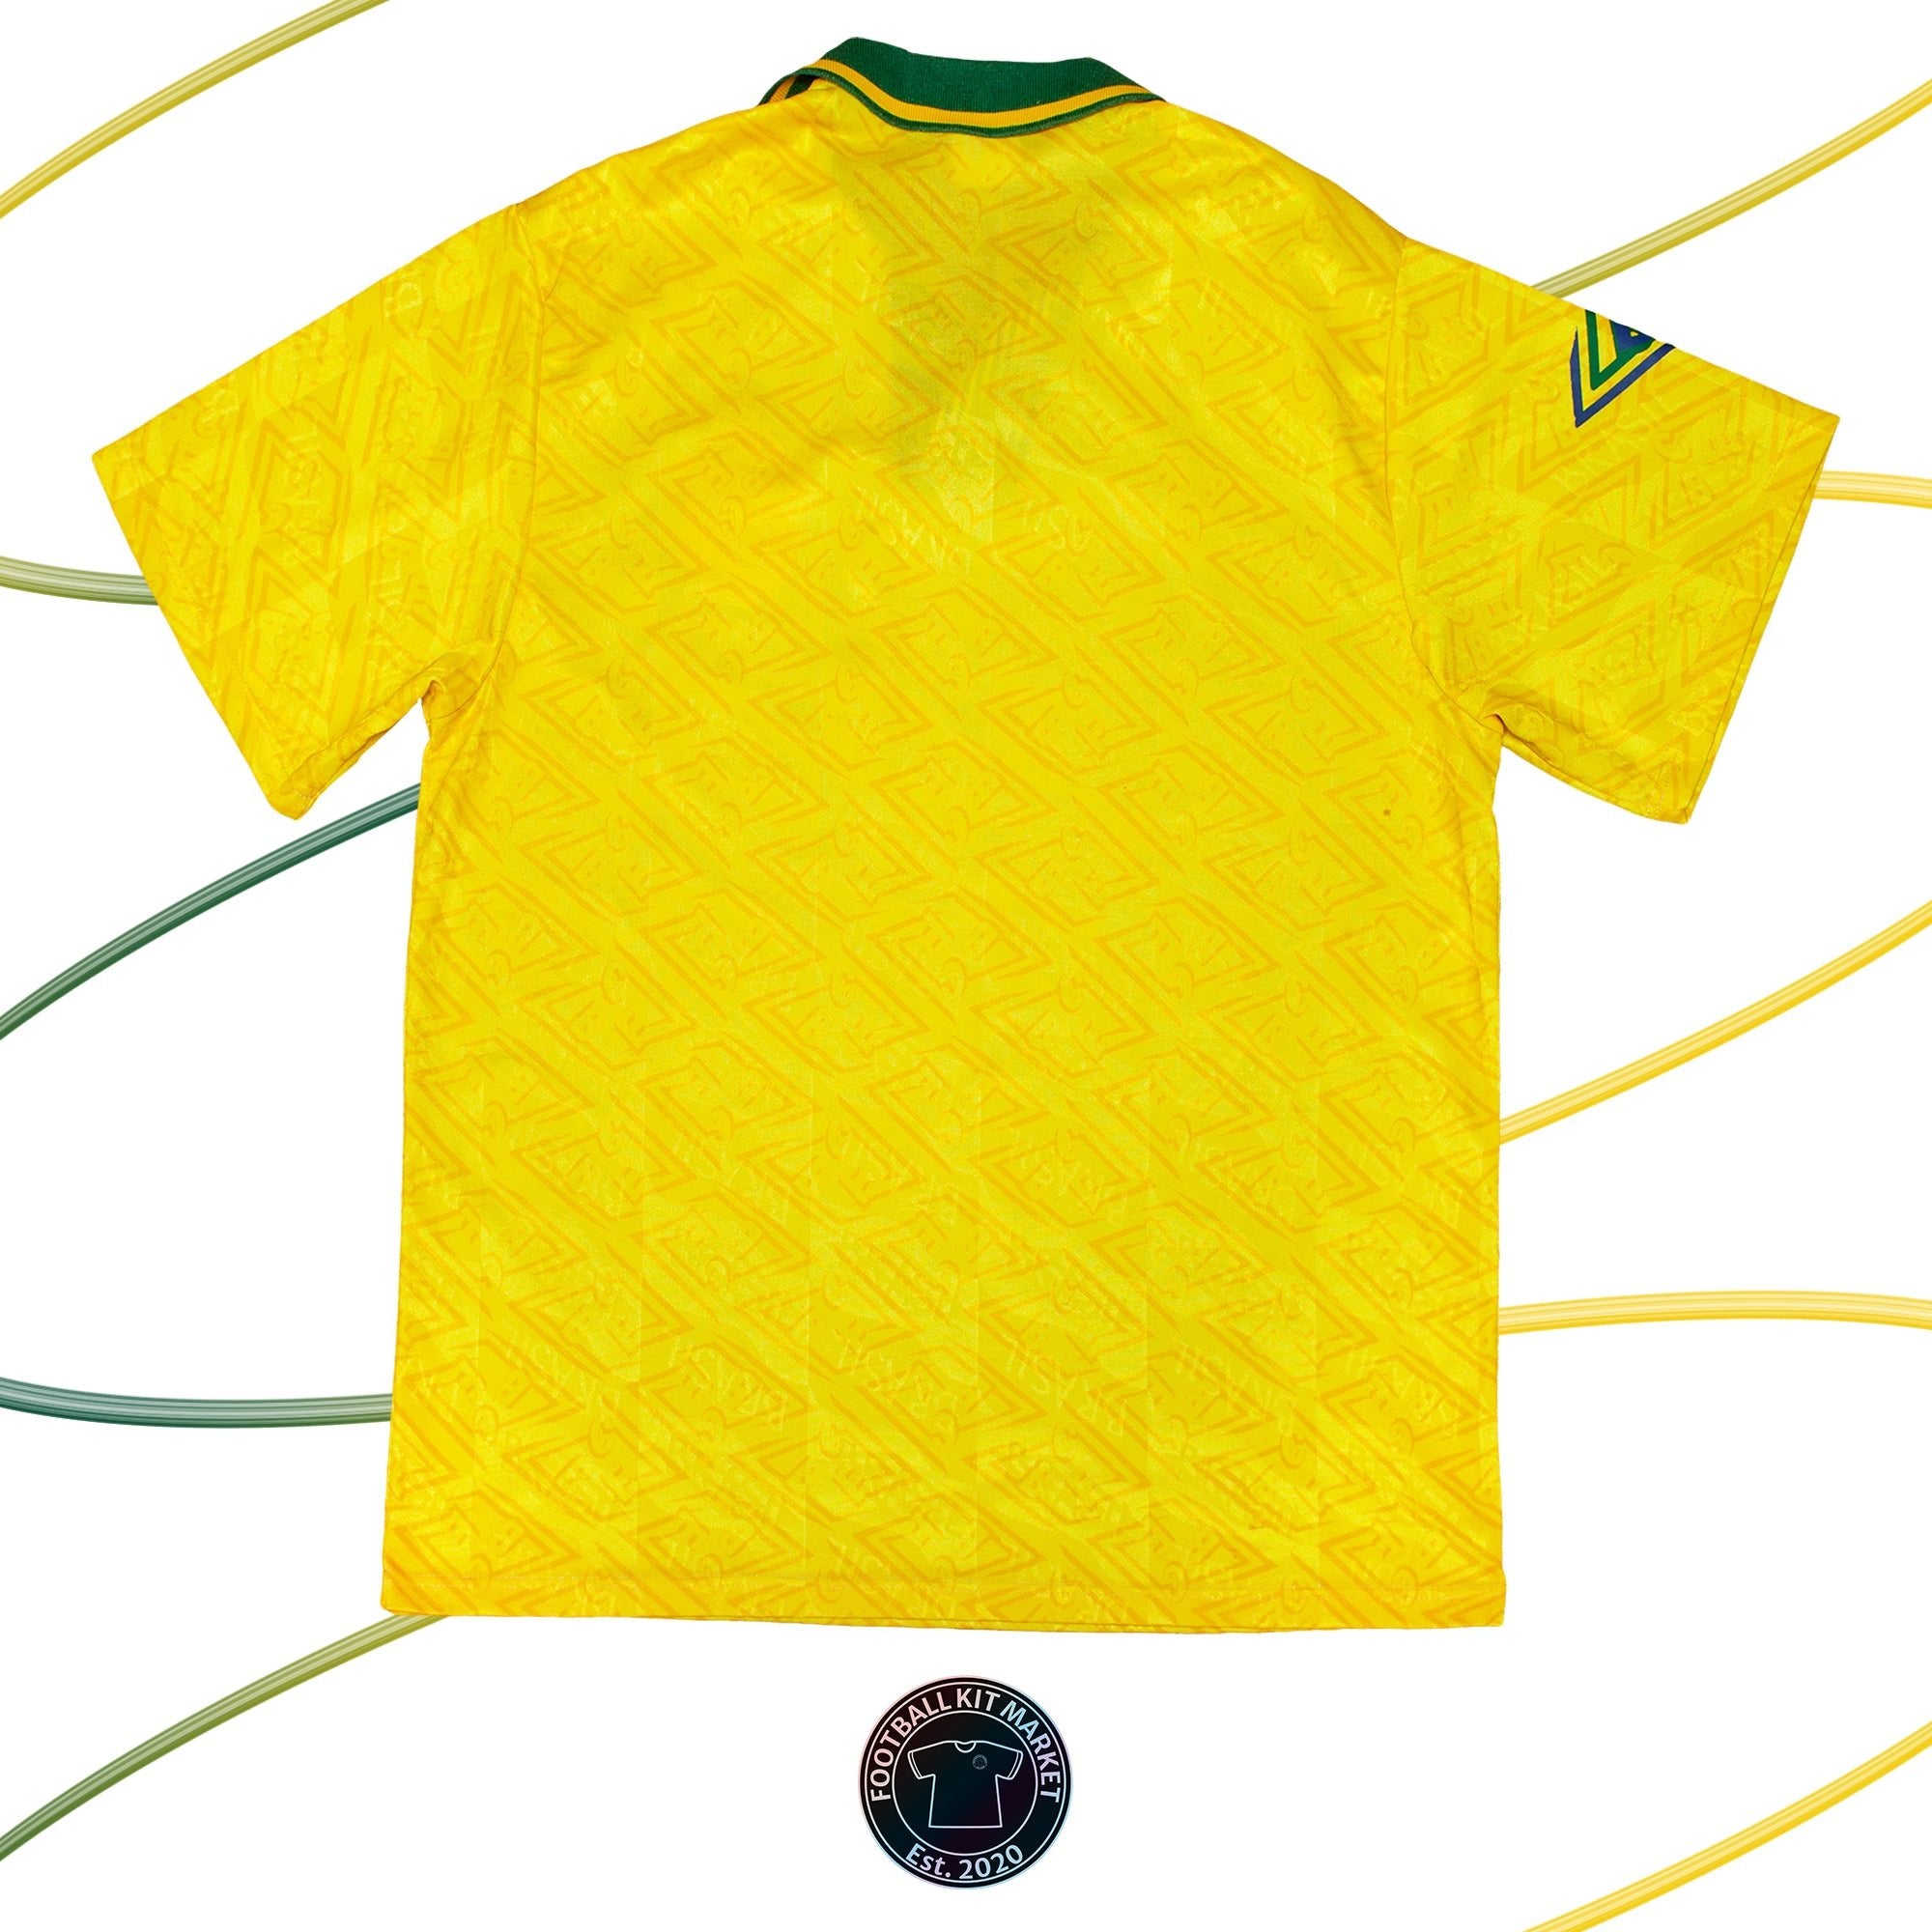 Genuine BRAZIL Home (1991-1993) - UMBRO (XL) - Product Image from Football Kit Market